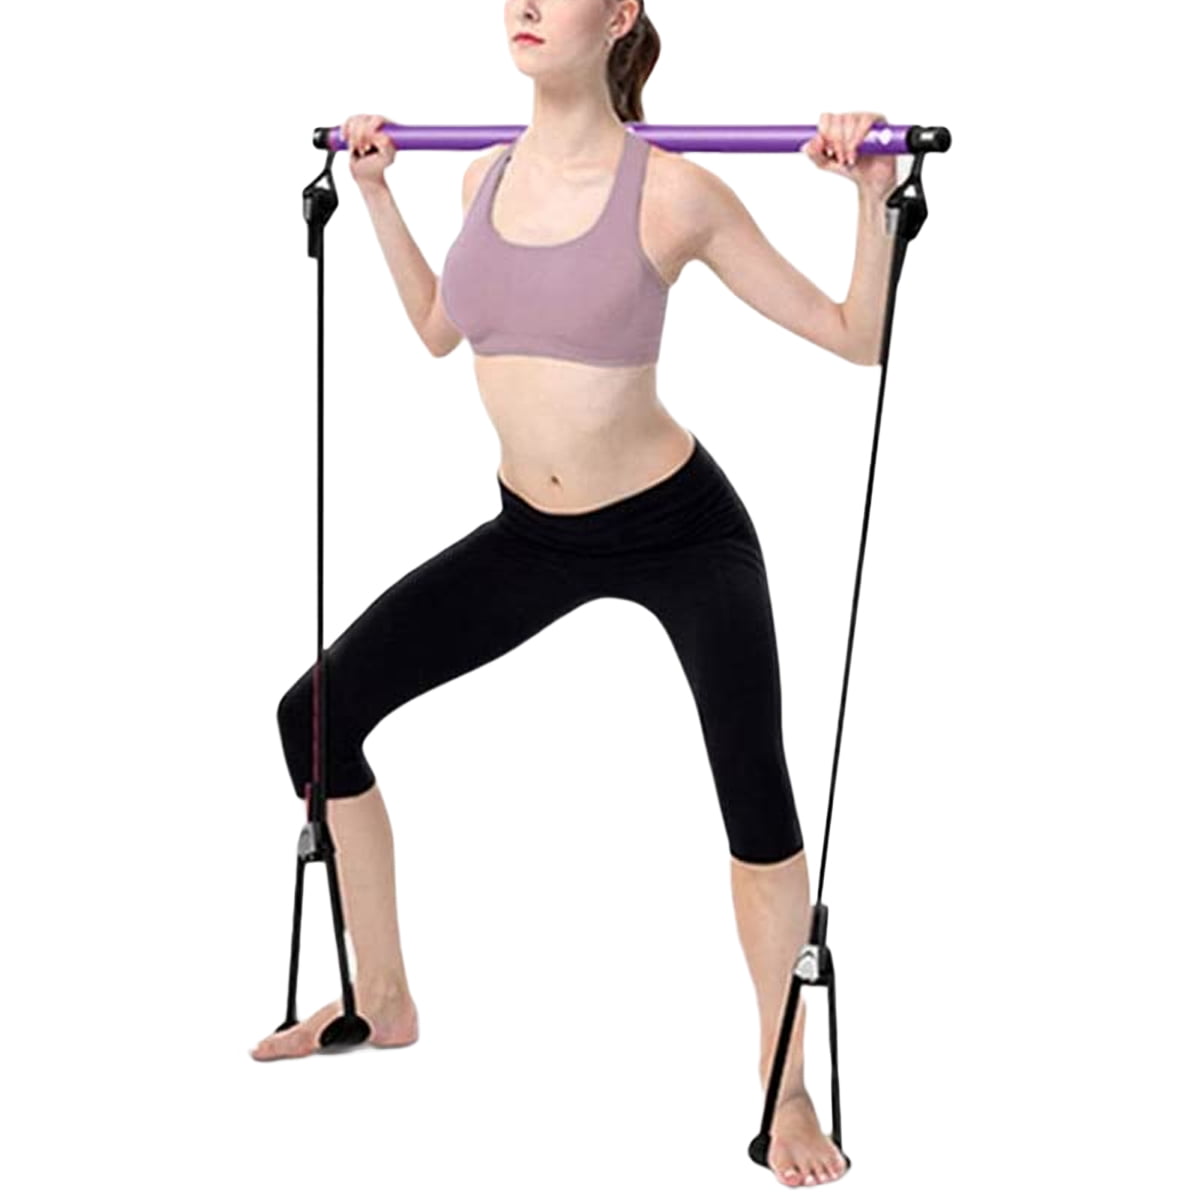 Muscle Toning WUOOYOQ Weight Loss For Adult，Portable Pilates Bar Kit with Adjustable Resistance Band for Different Height Home Gym Exercise Stick Yoga Bar with Foot Loop for Hipsline Stretching 